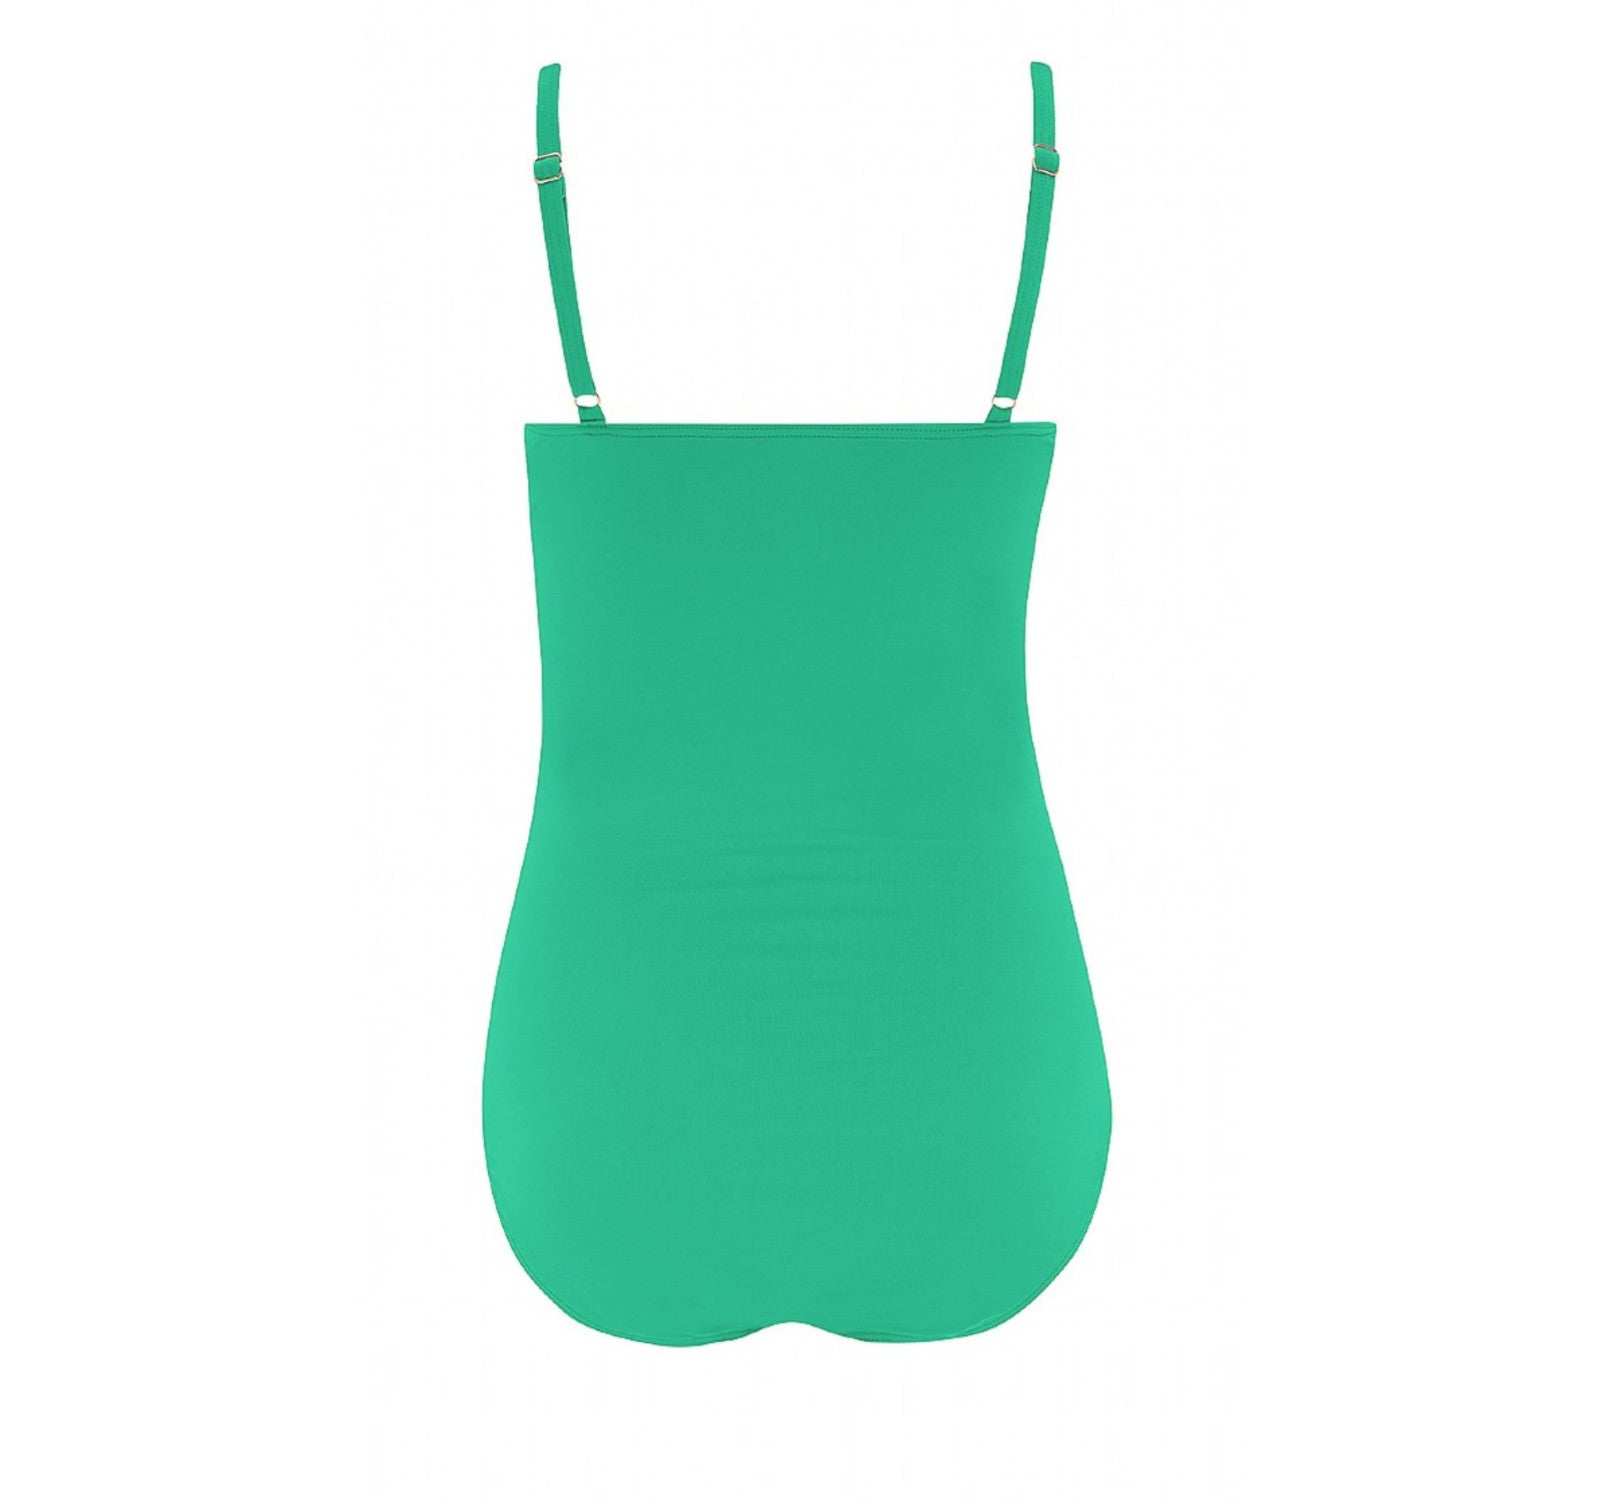 Casablanca Ruched Swimsuit in a vibrant green colour | Swimwear from Nicola Jane | Pocketed mastectomy swimwear for women touched by breast cancer